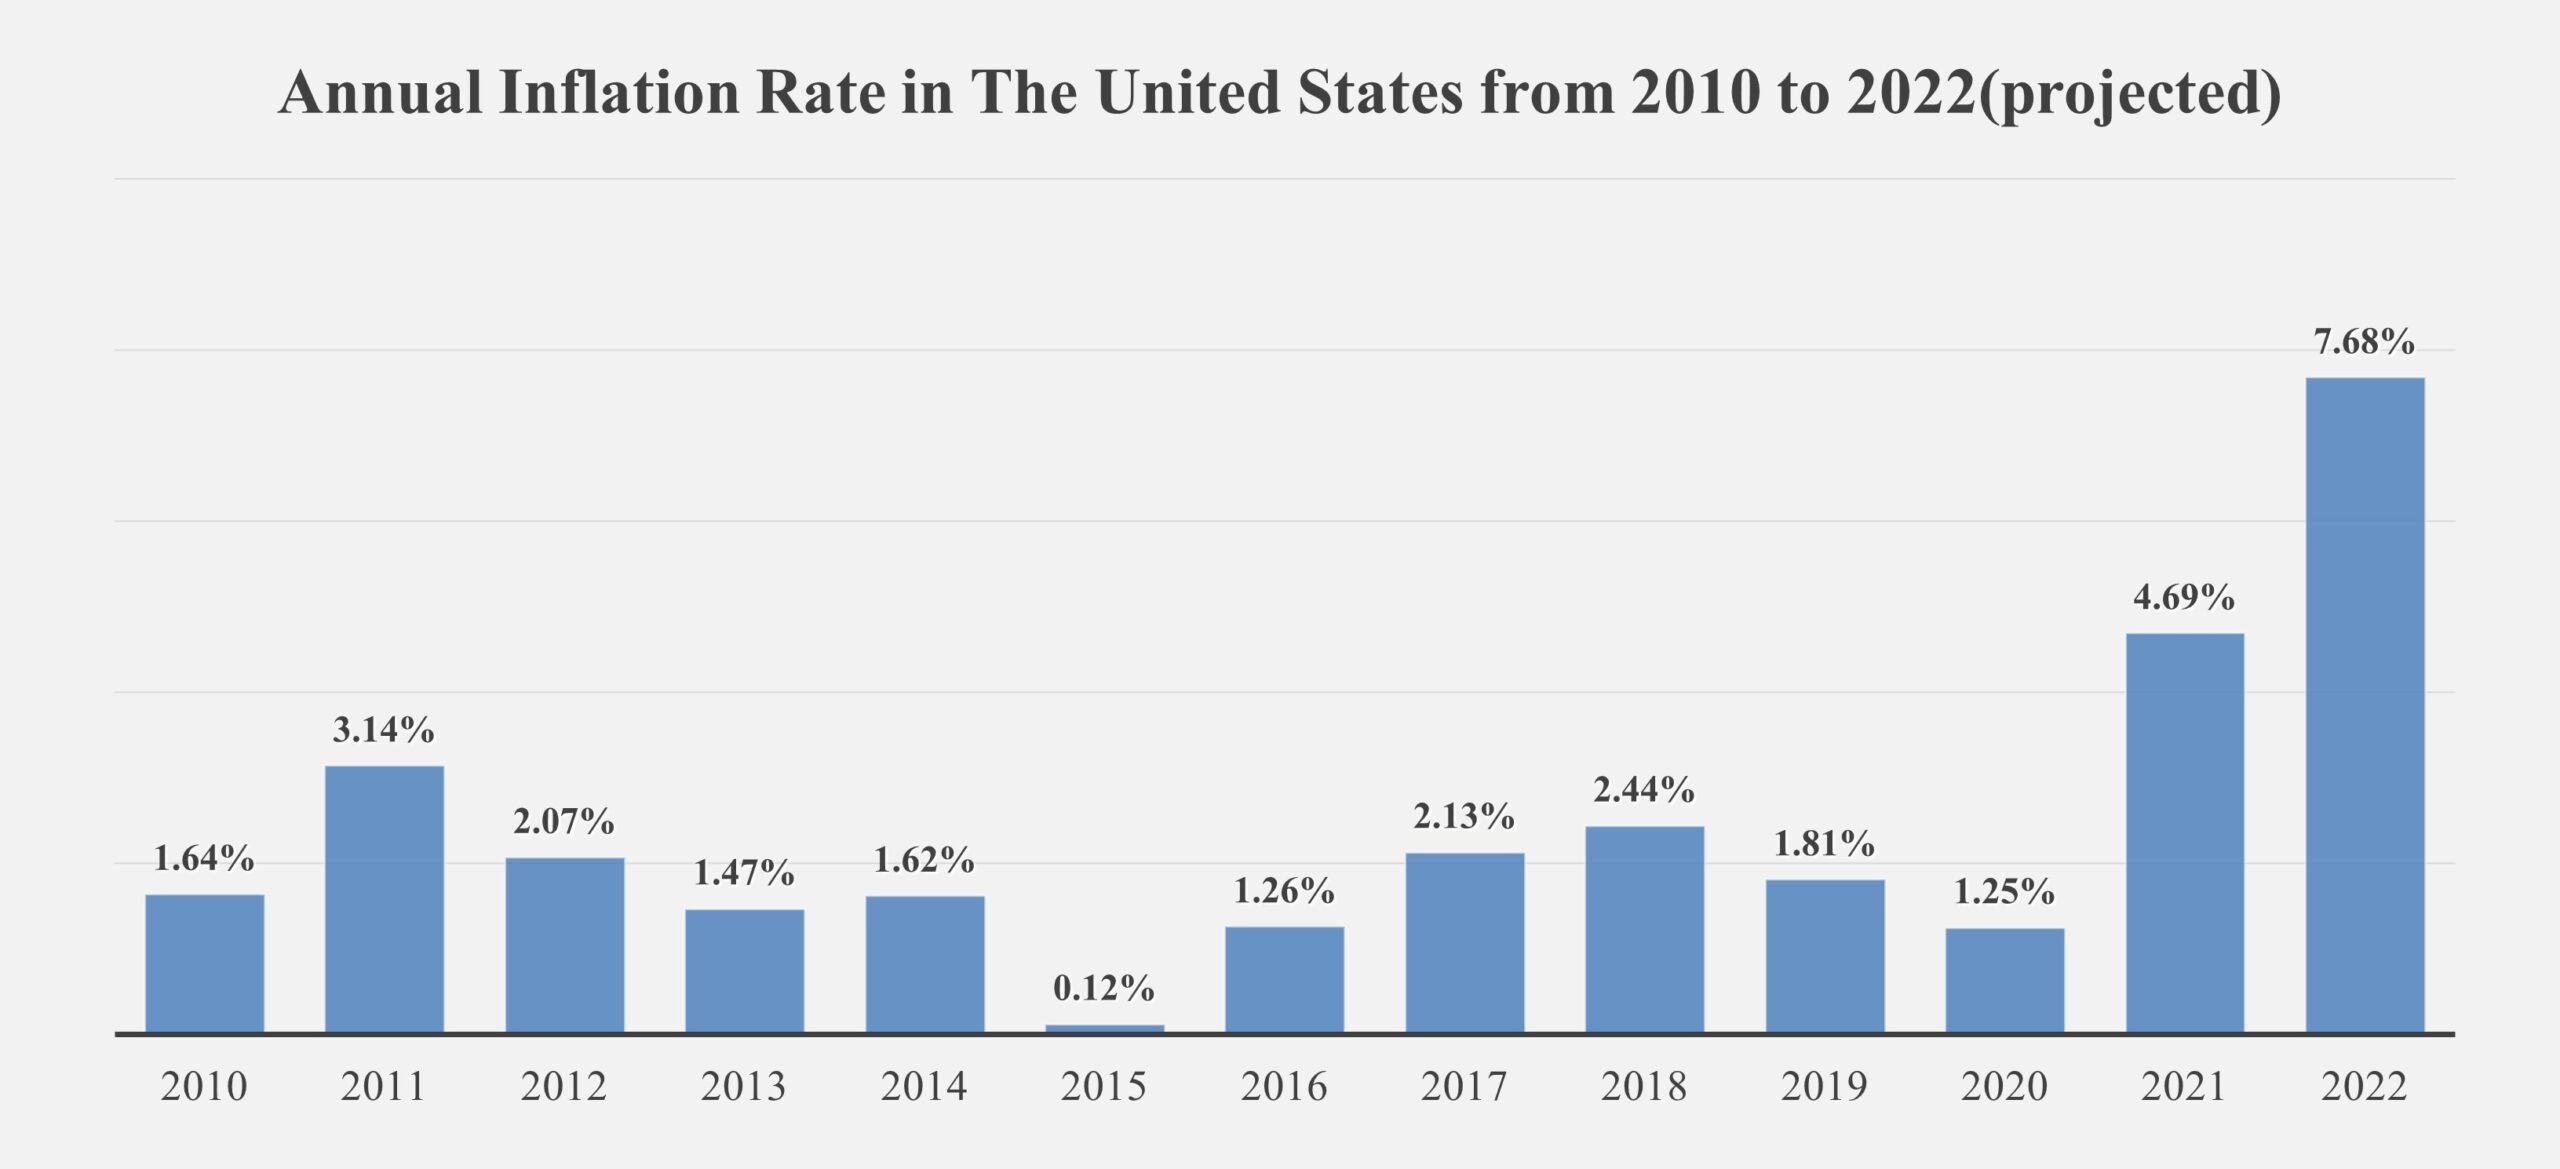 US annual inflation rate from 2010 to 2022